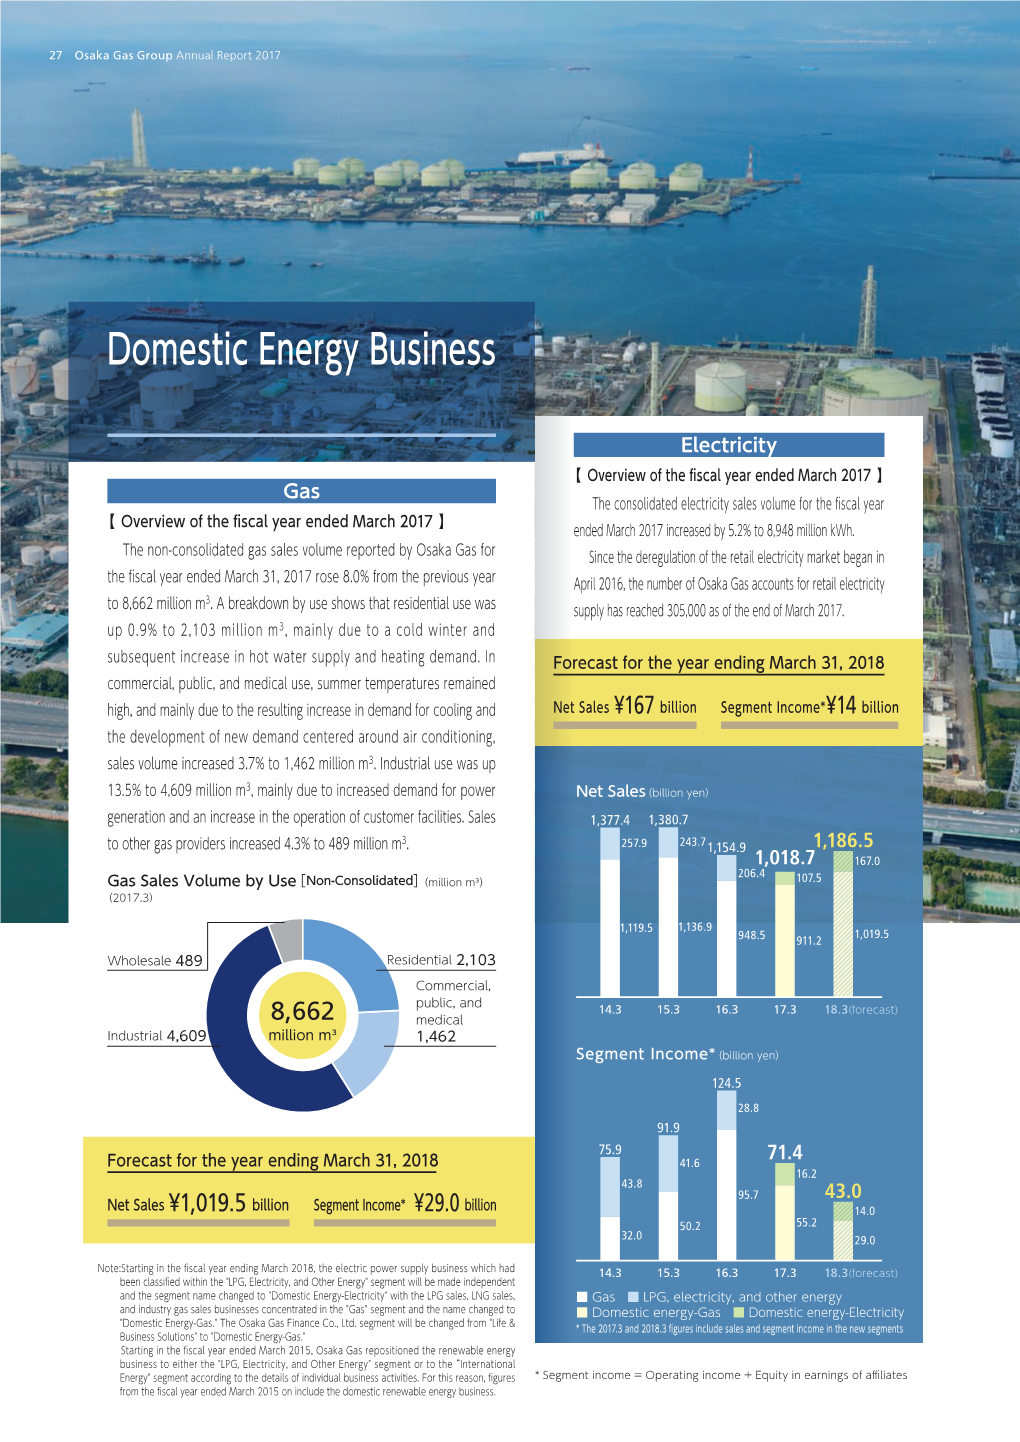 Domestic Energy Business Electricity and LPG While Minimizing the Outﬂow of Gas Customers